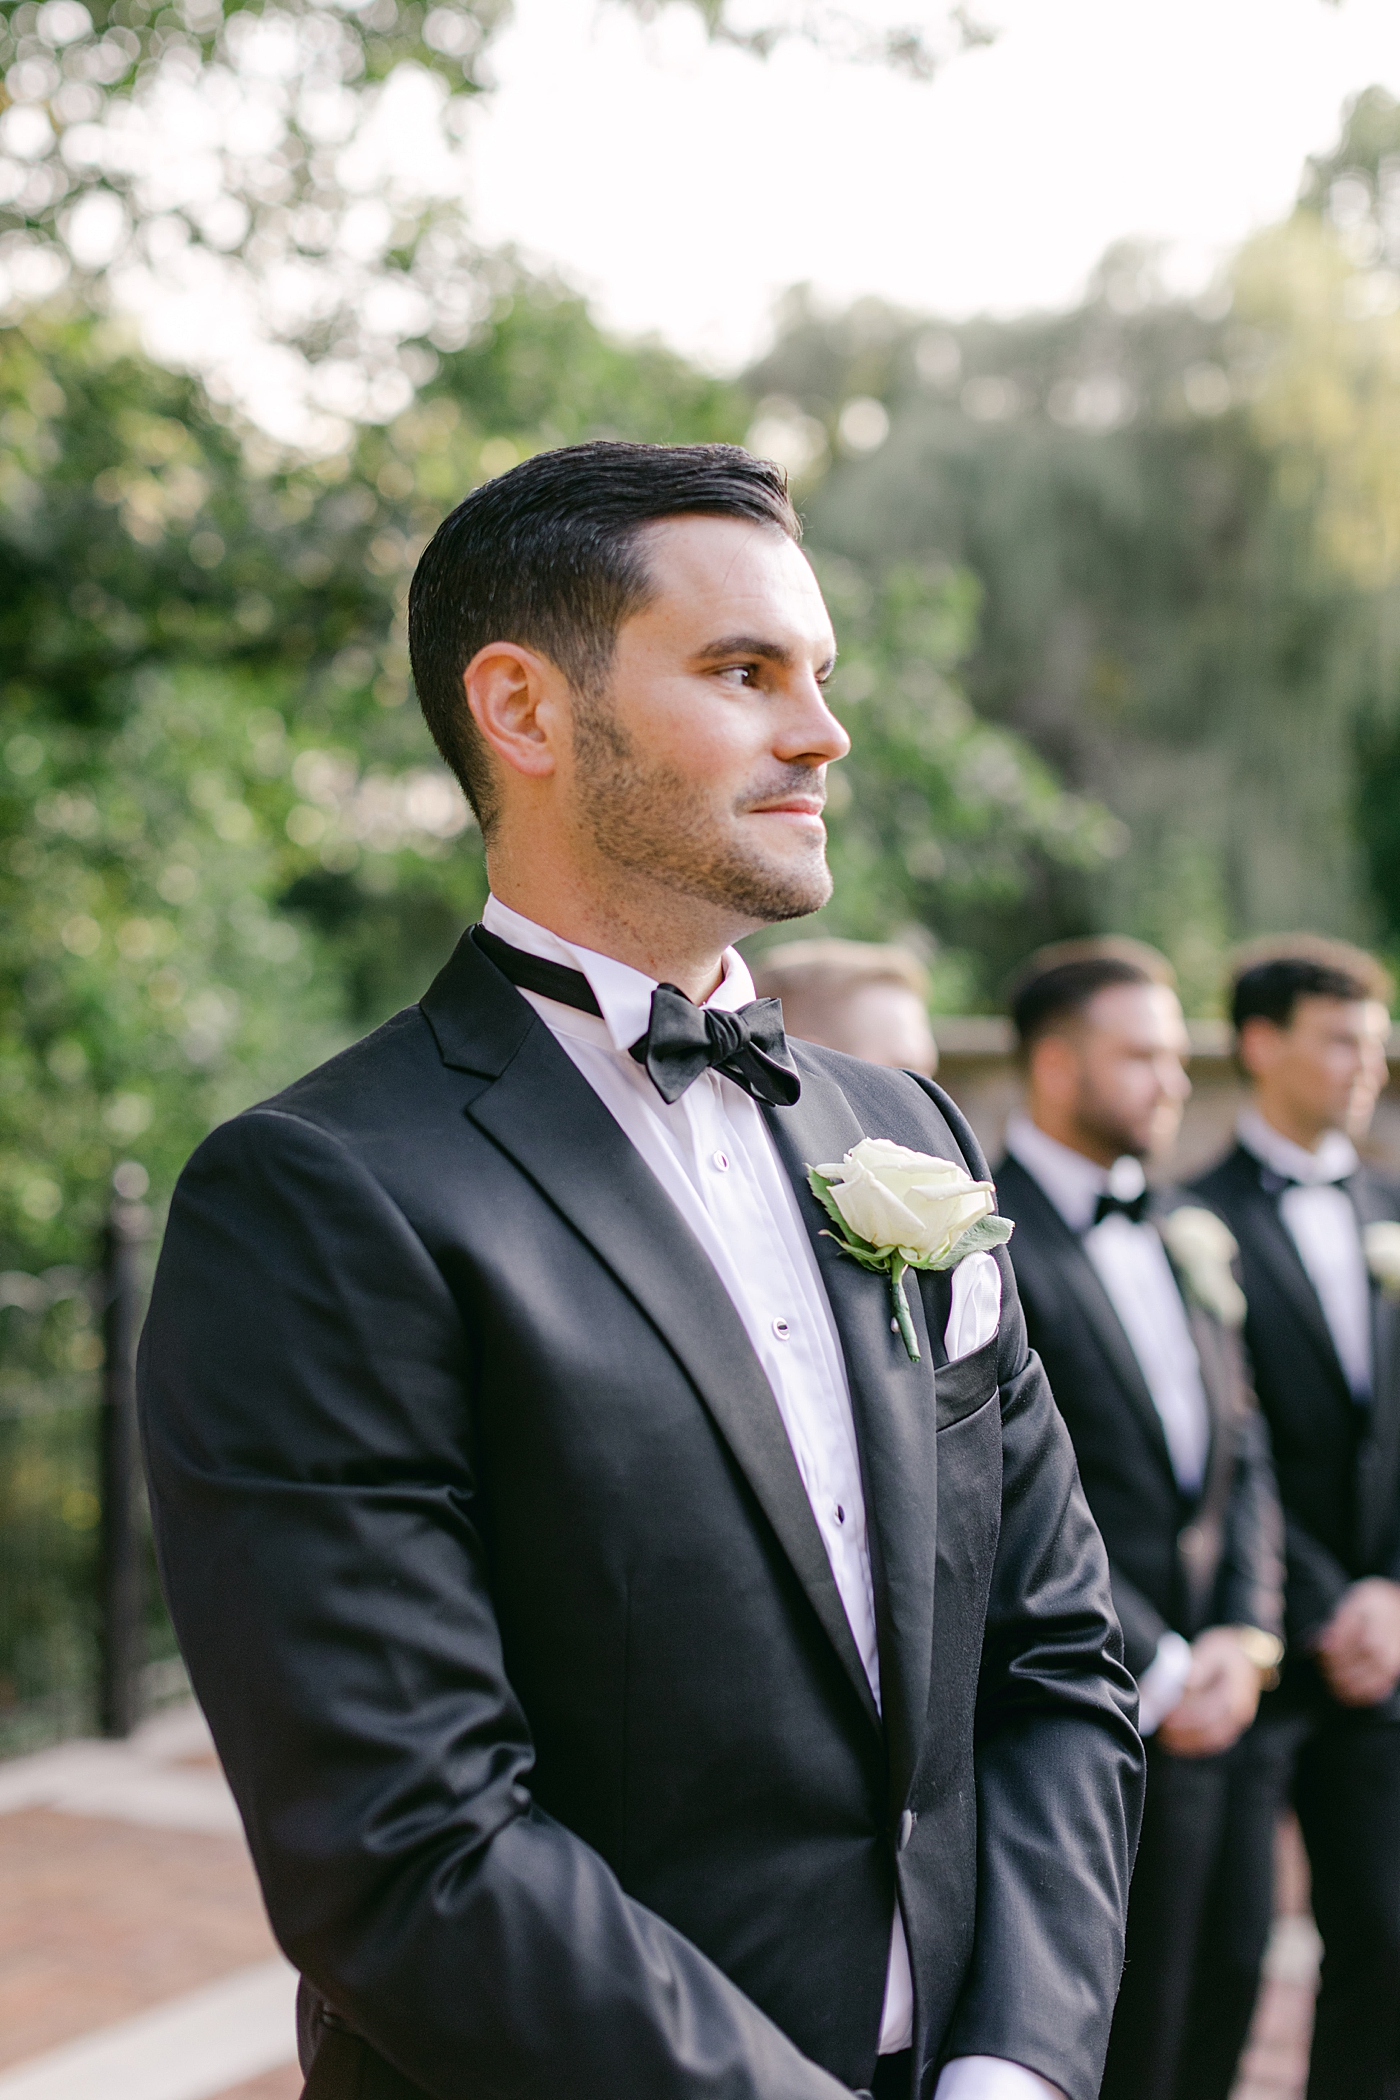 Groom waiting for bride walking down the aisle during Hotel du Village Wedding | Image by Hope Helmuth Photography